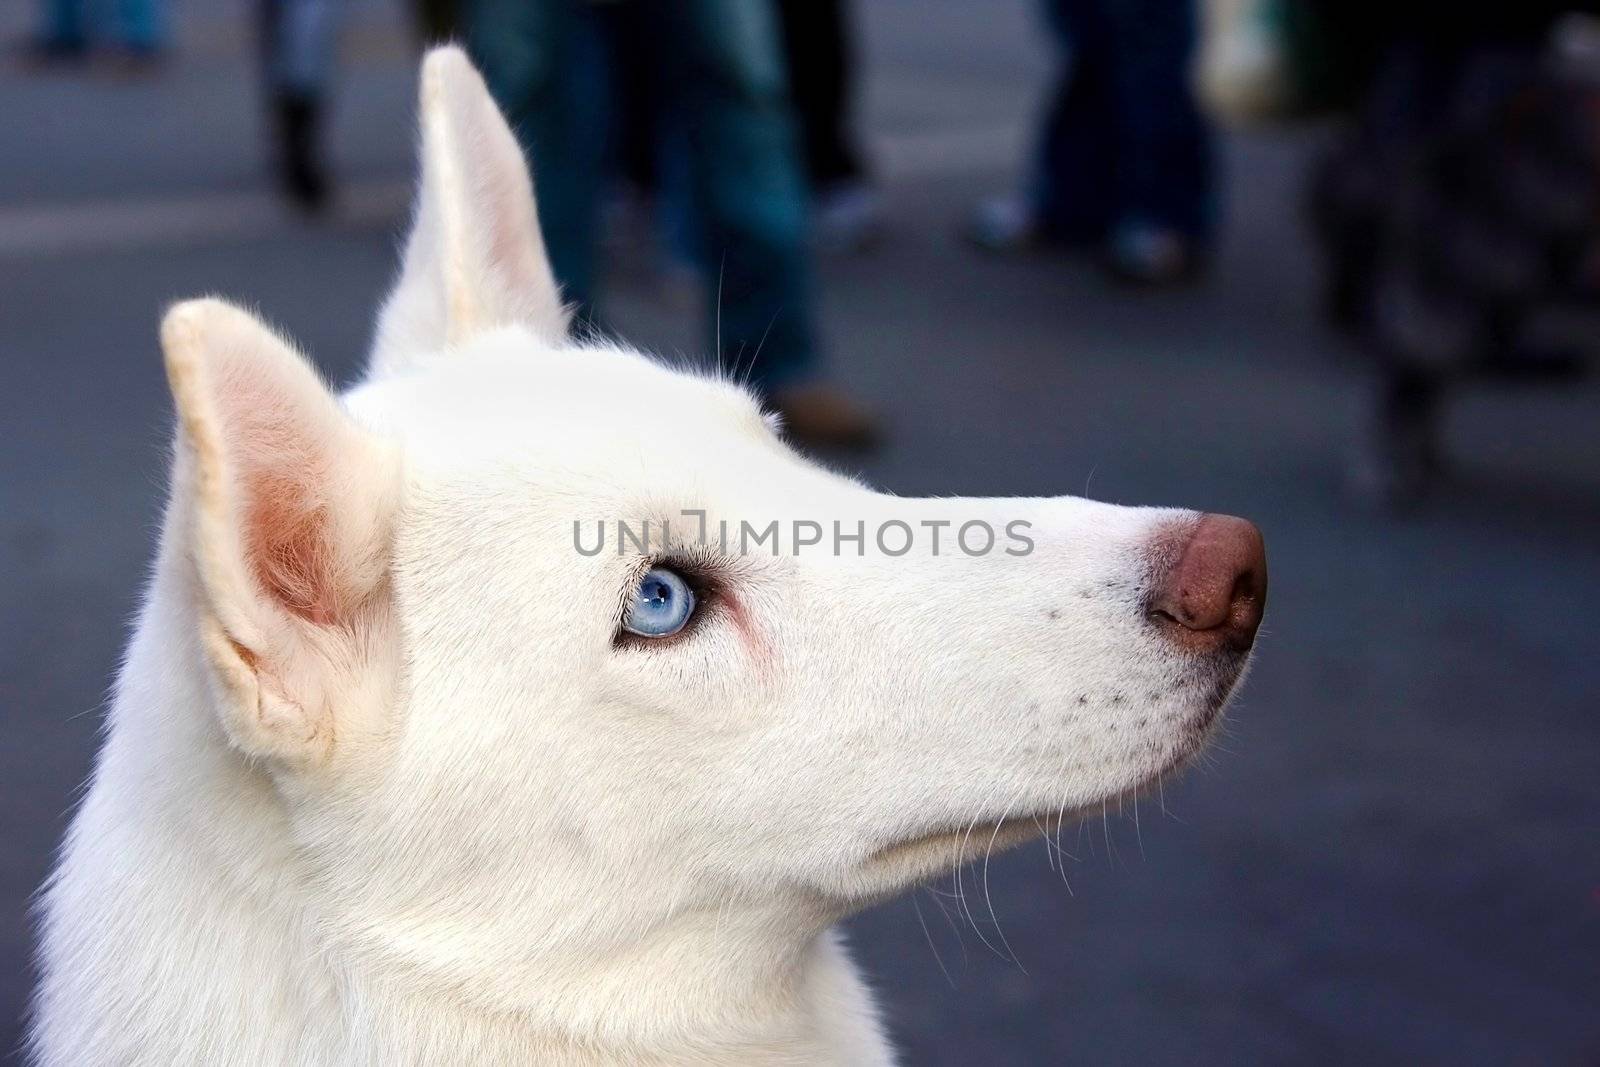 A white Husky's head shot from the side, showing his blue eye.